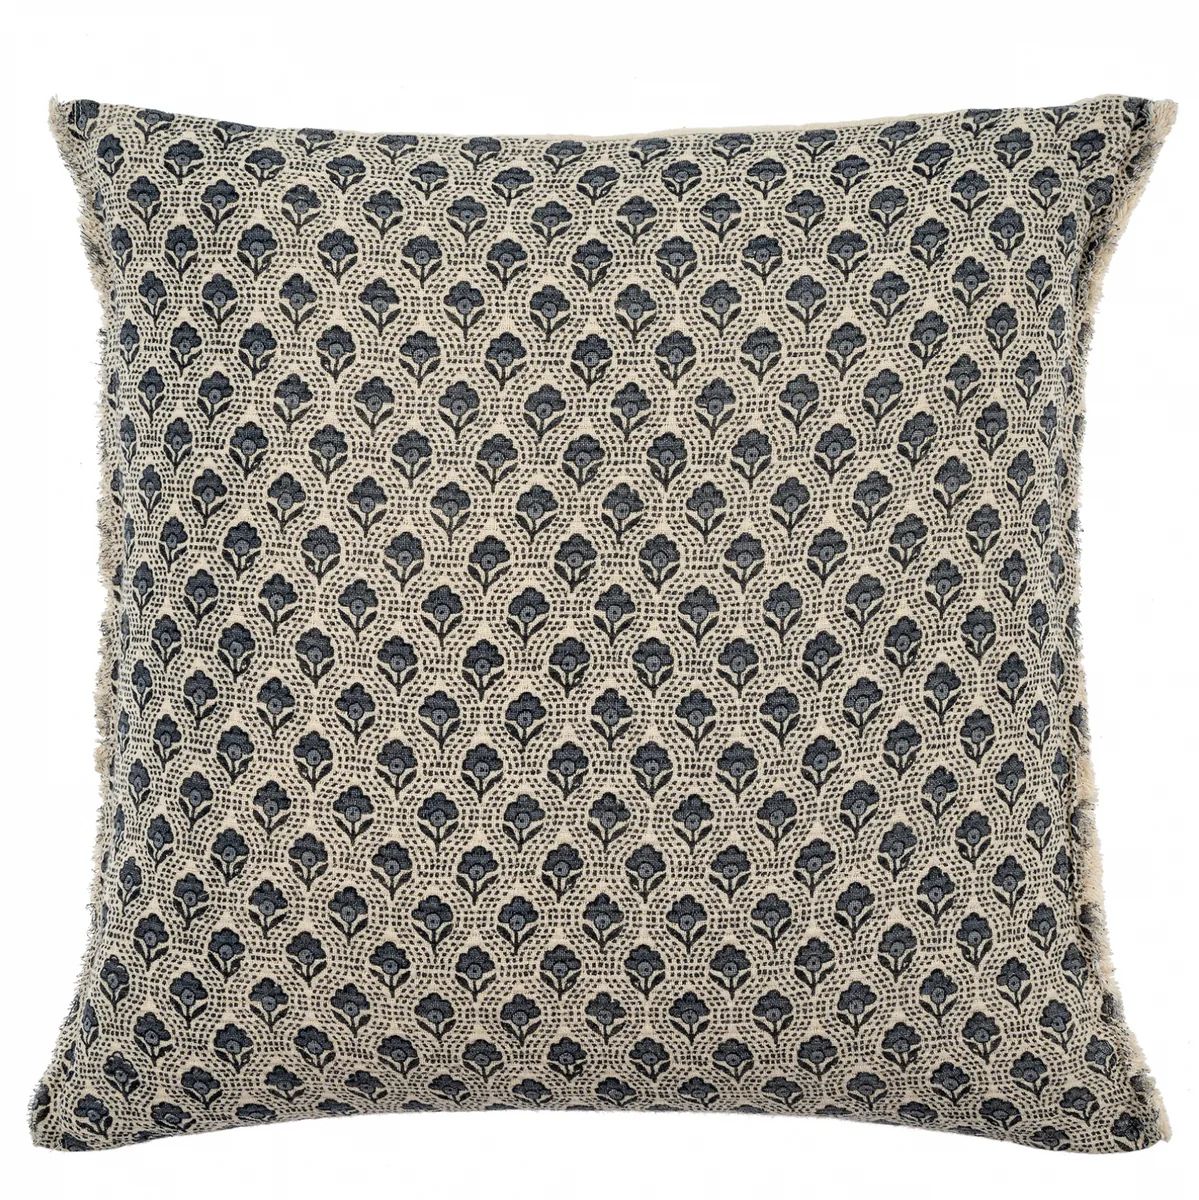 Periwinkle Pillow | Cottonwood Company